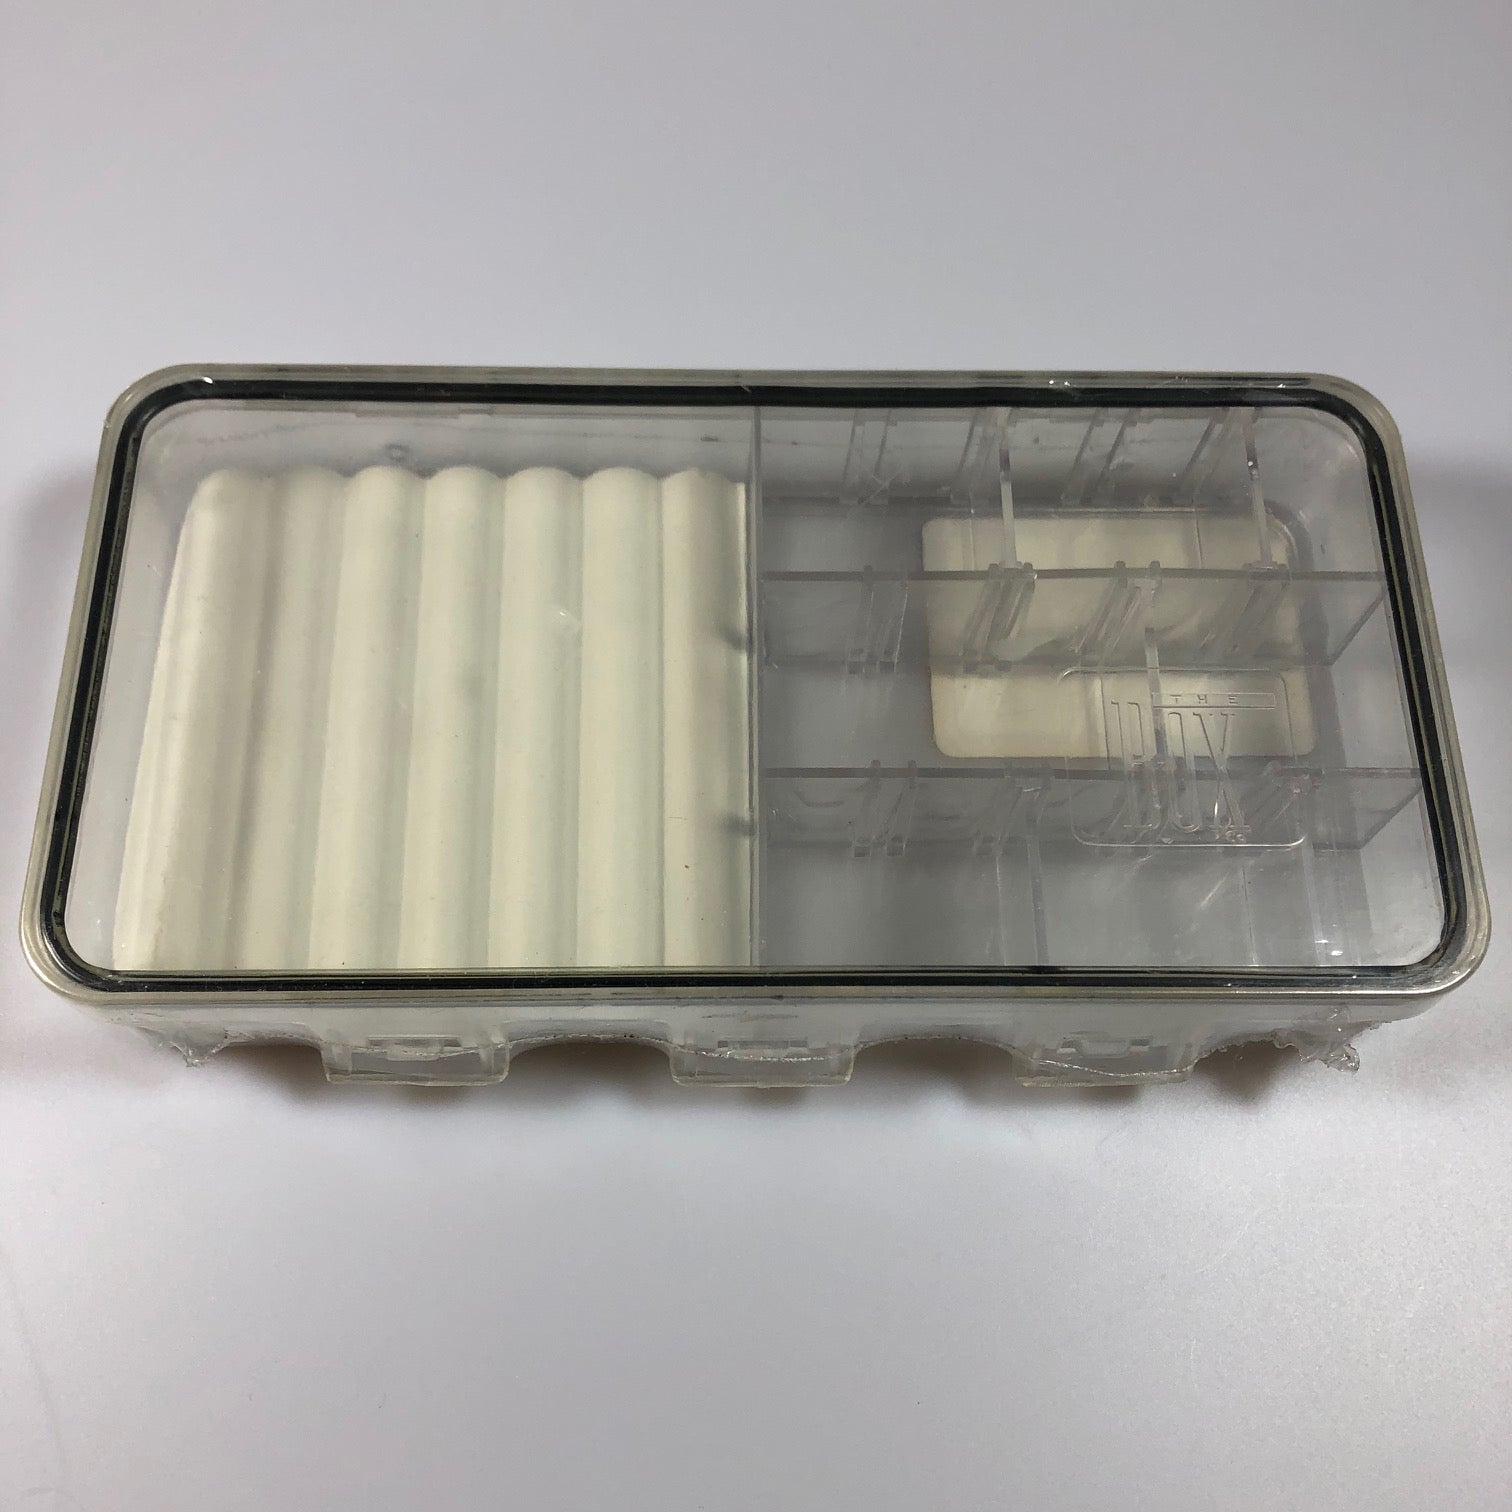 Offshore Series Fly Boxes - Wilkinson Fly Fishing LLC